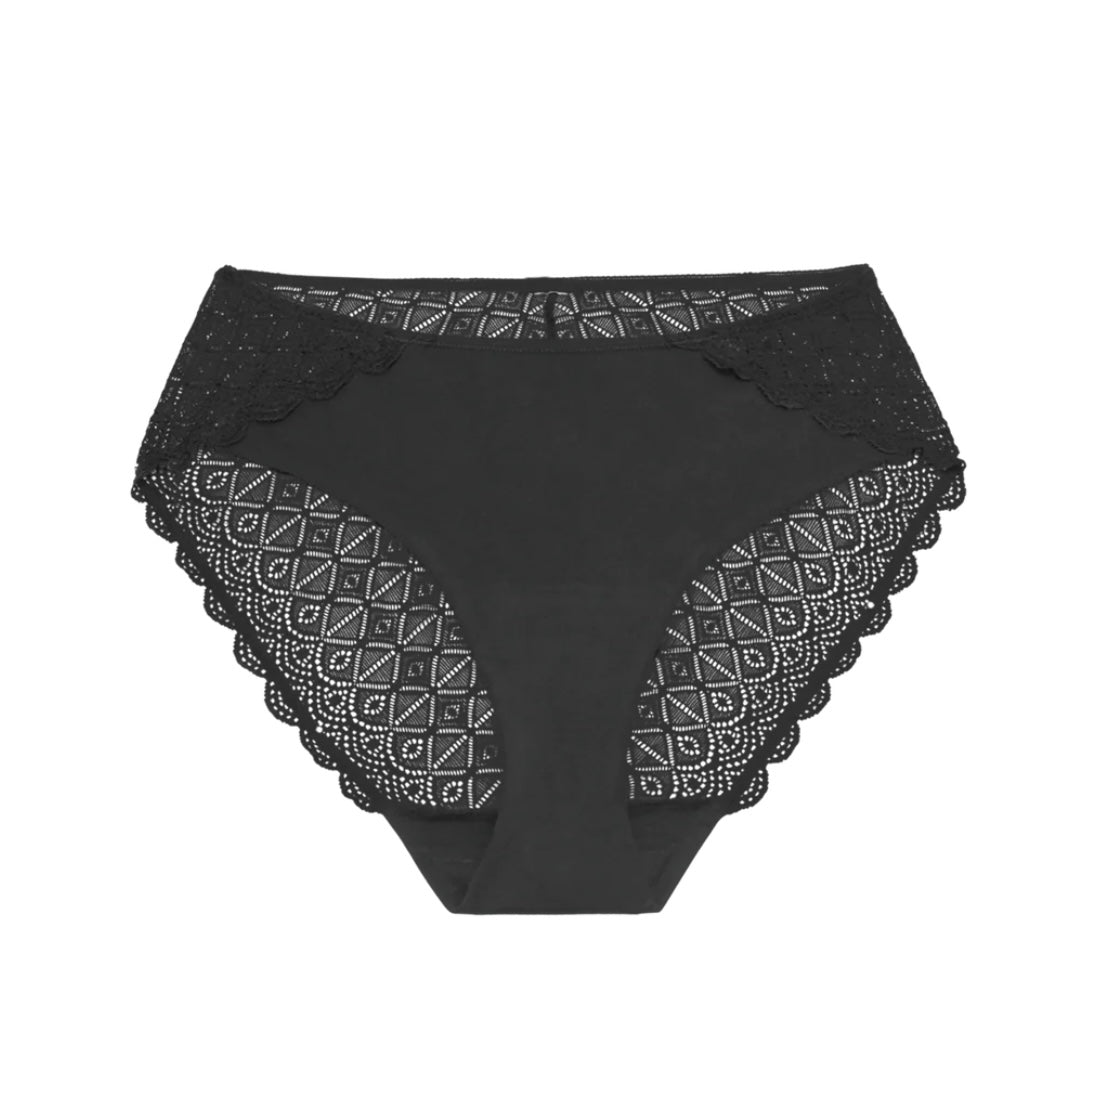 Urban Skivvies - Leak Proof Lace Back Brief - Black - About the Bra